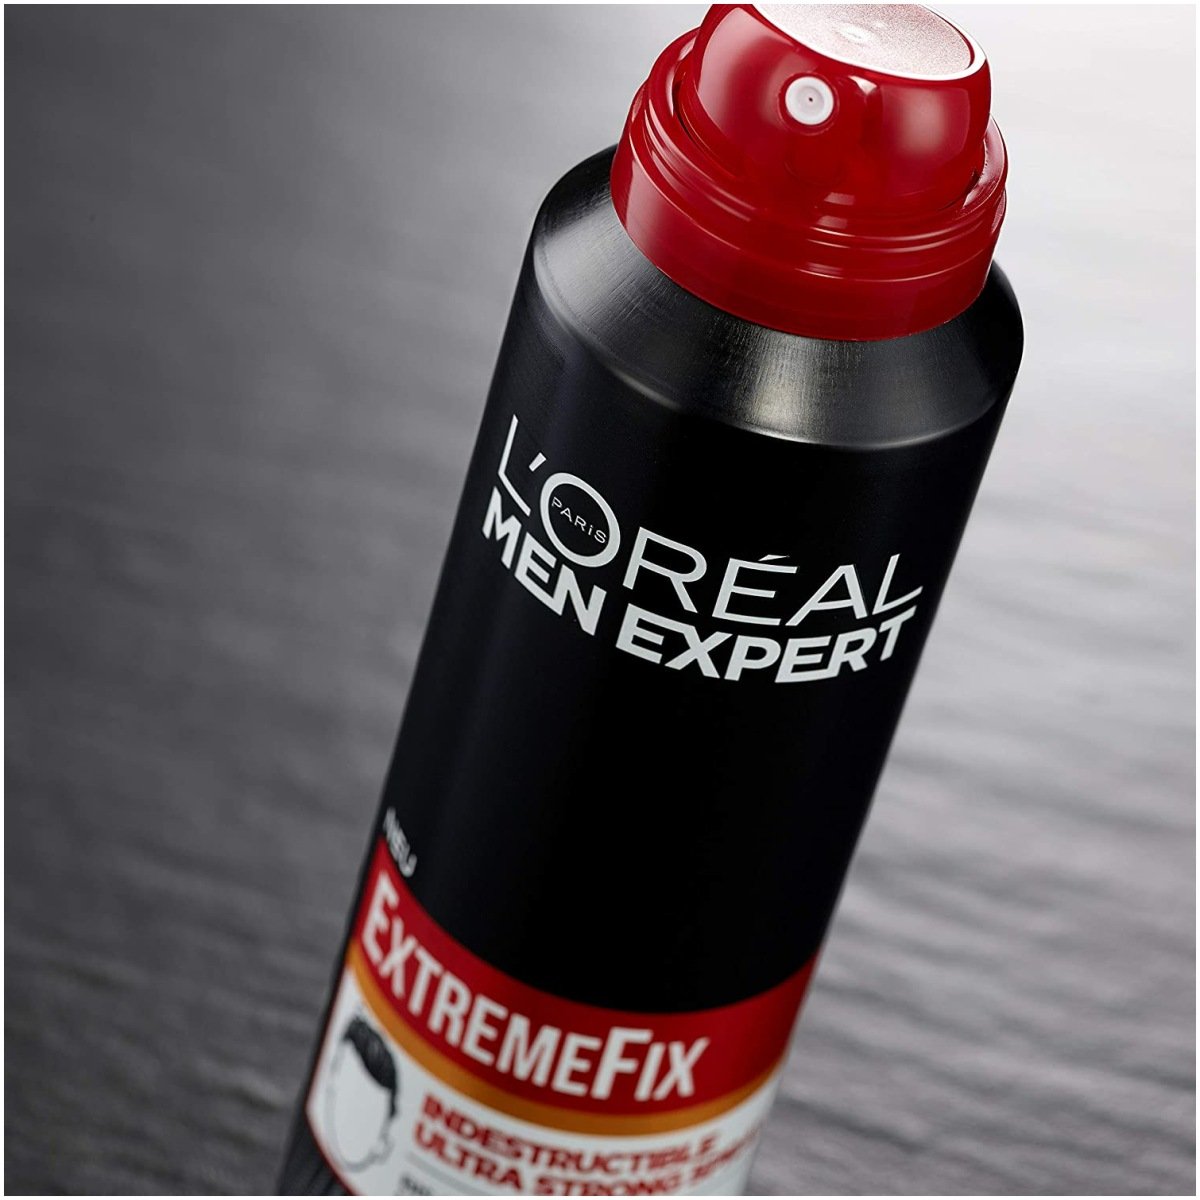 L'Oréal Men Expert Extreme Fix Industrial Ultra Strong Hair Styling Spray 200ml